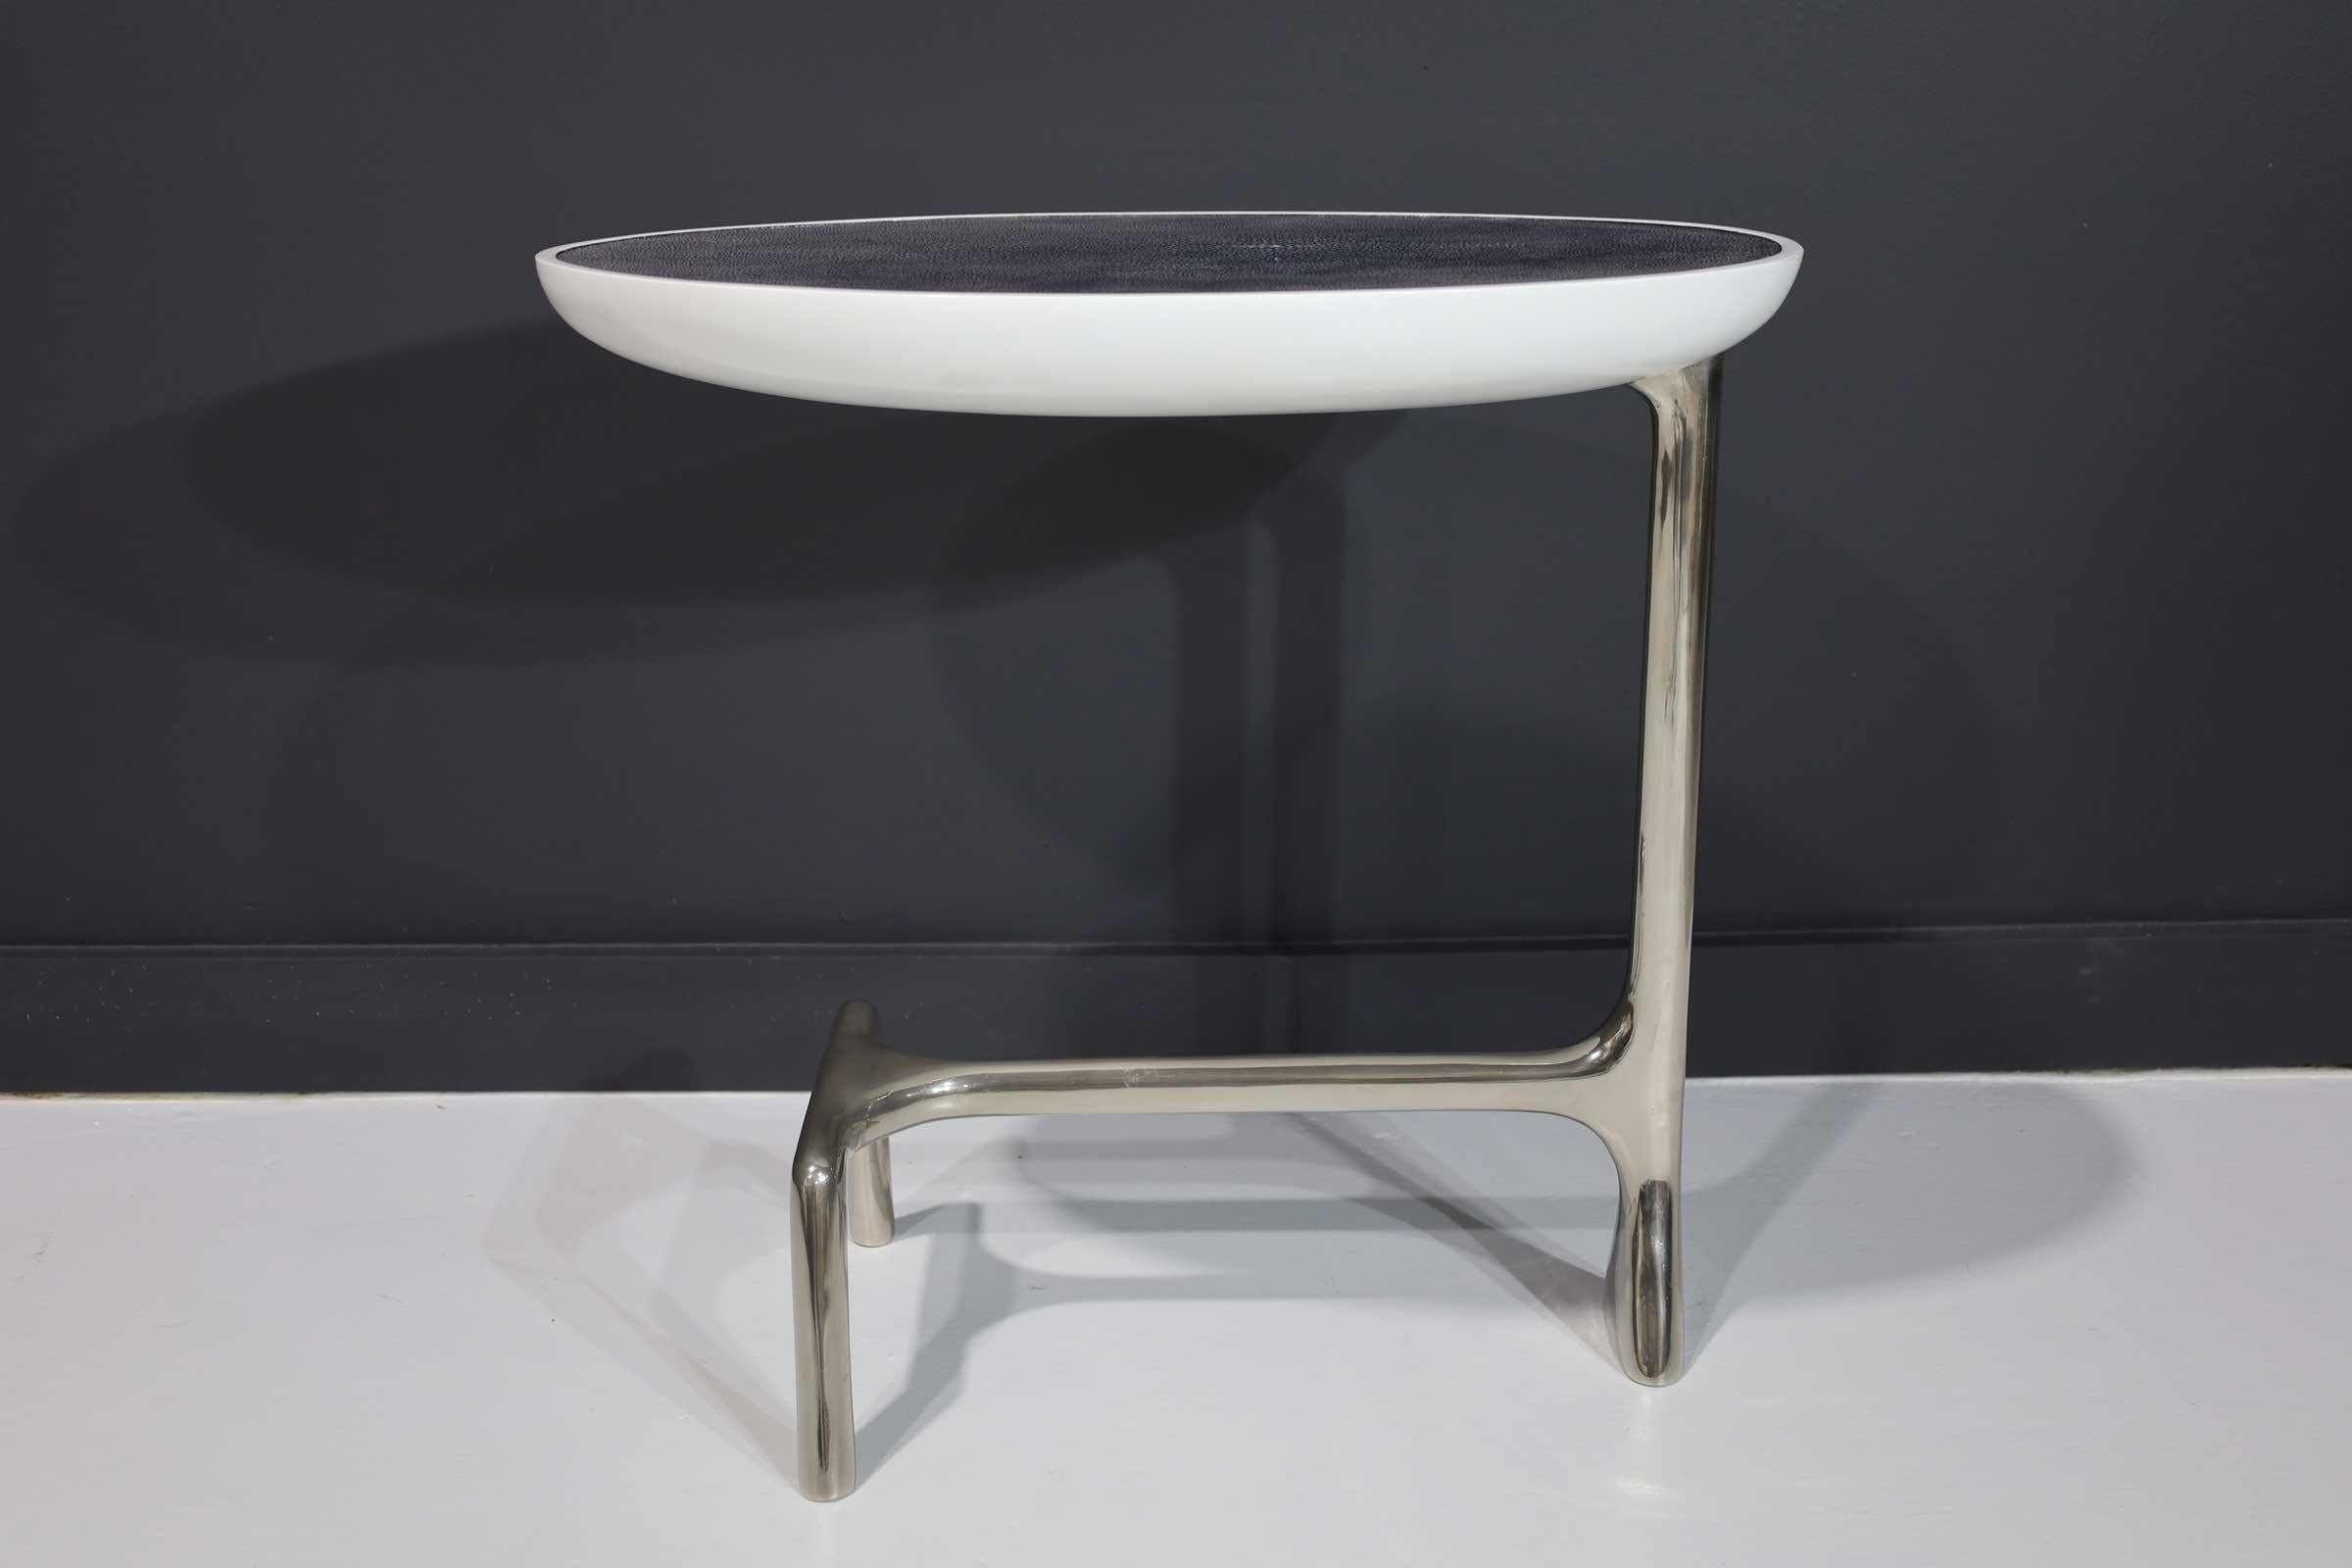 Gorgeous table by Scala Luxury. A polished nickel base and shagreen top. This piece is a solid base side table that has been brush polished. The shagreen top is made from one rare large shagreen skin. The top has a white high gloss lacquer finish